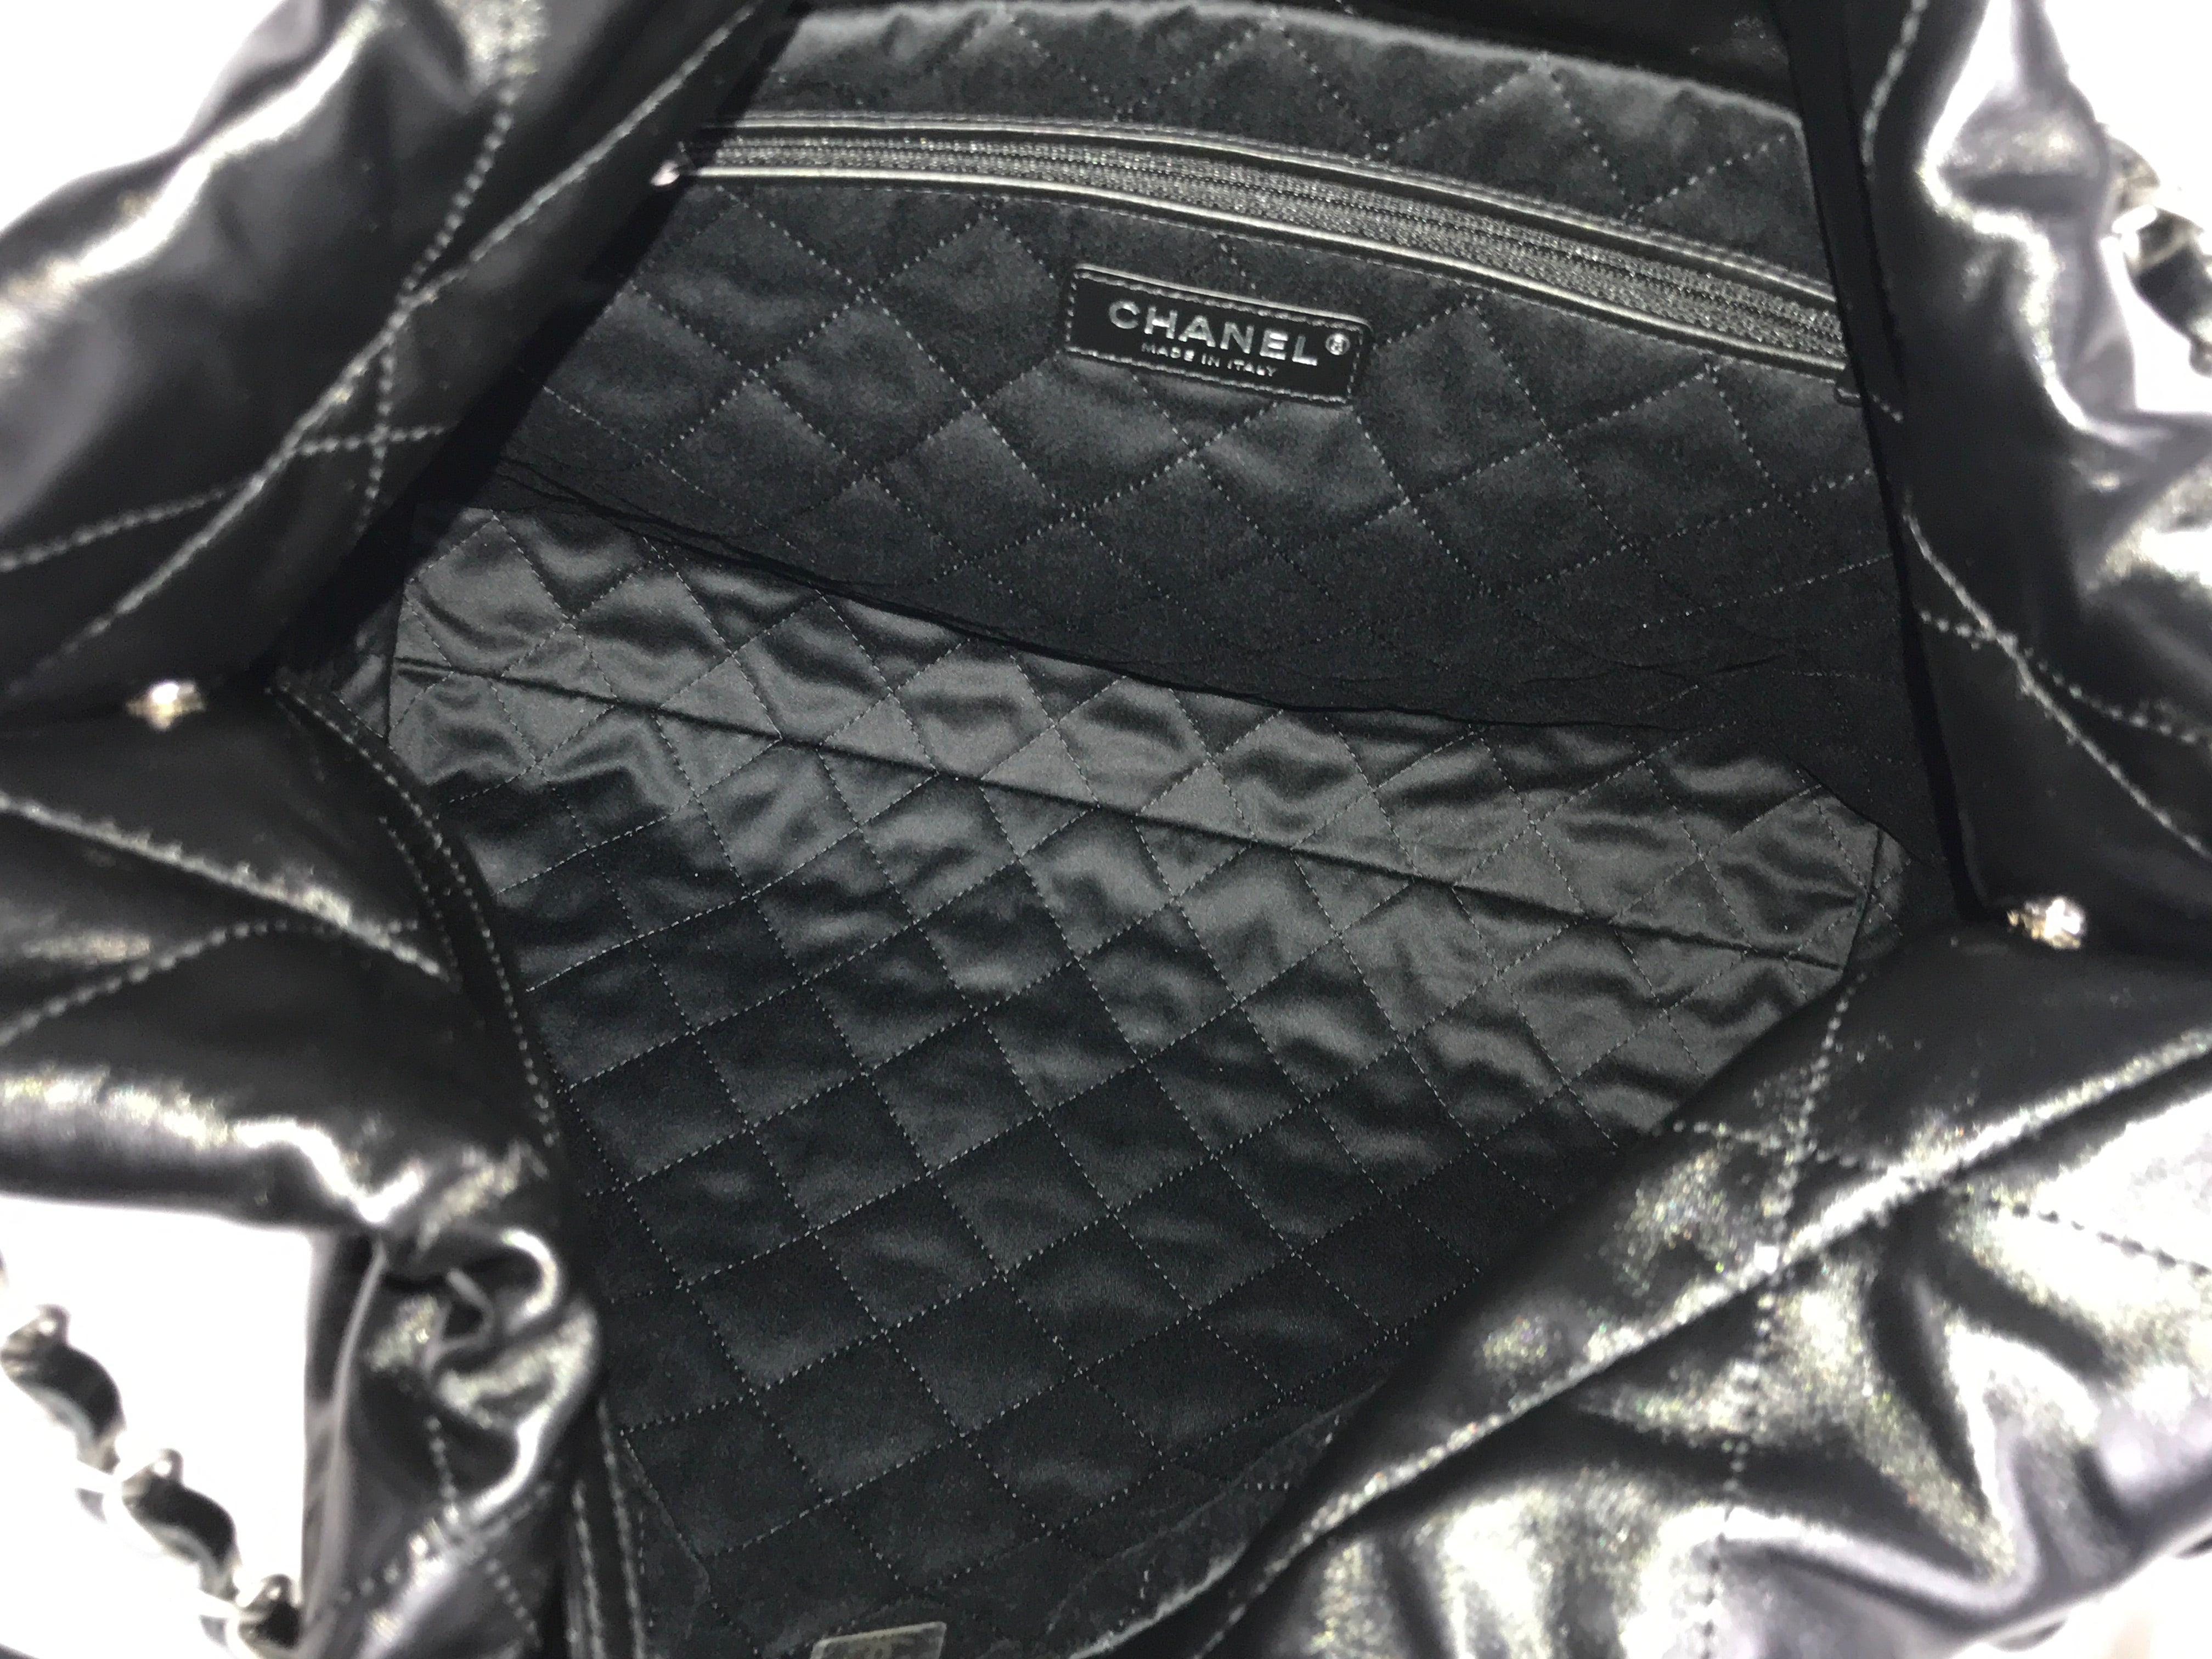 Shiny Black Quilted Calfskin Leather 23S Hobo Bag w/MSHW